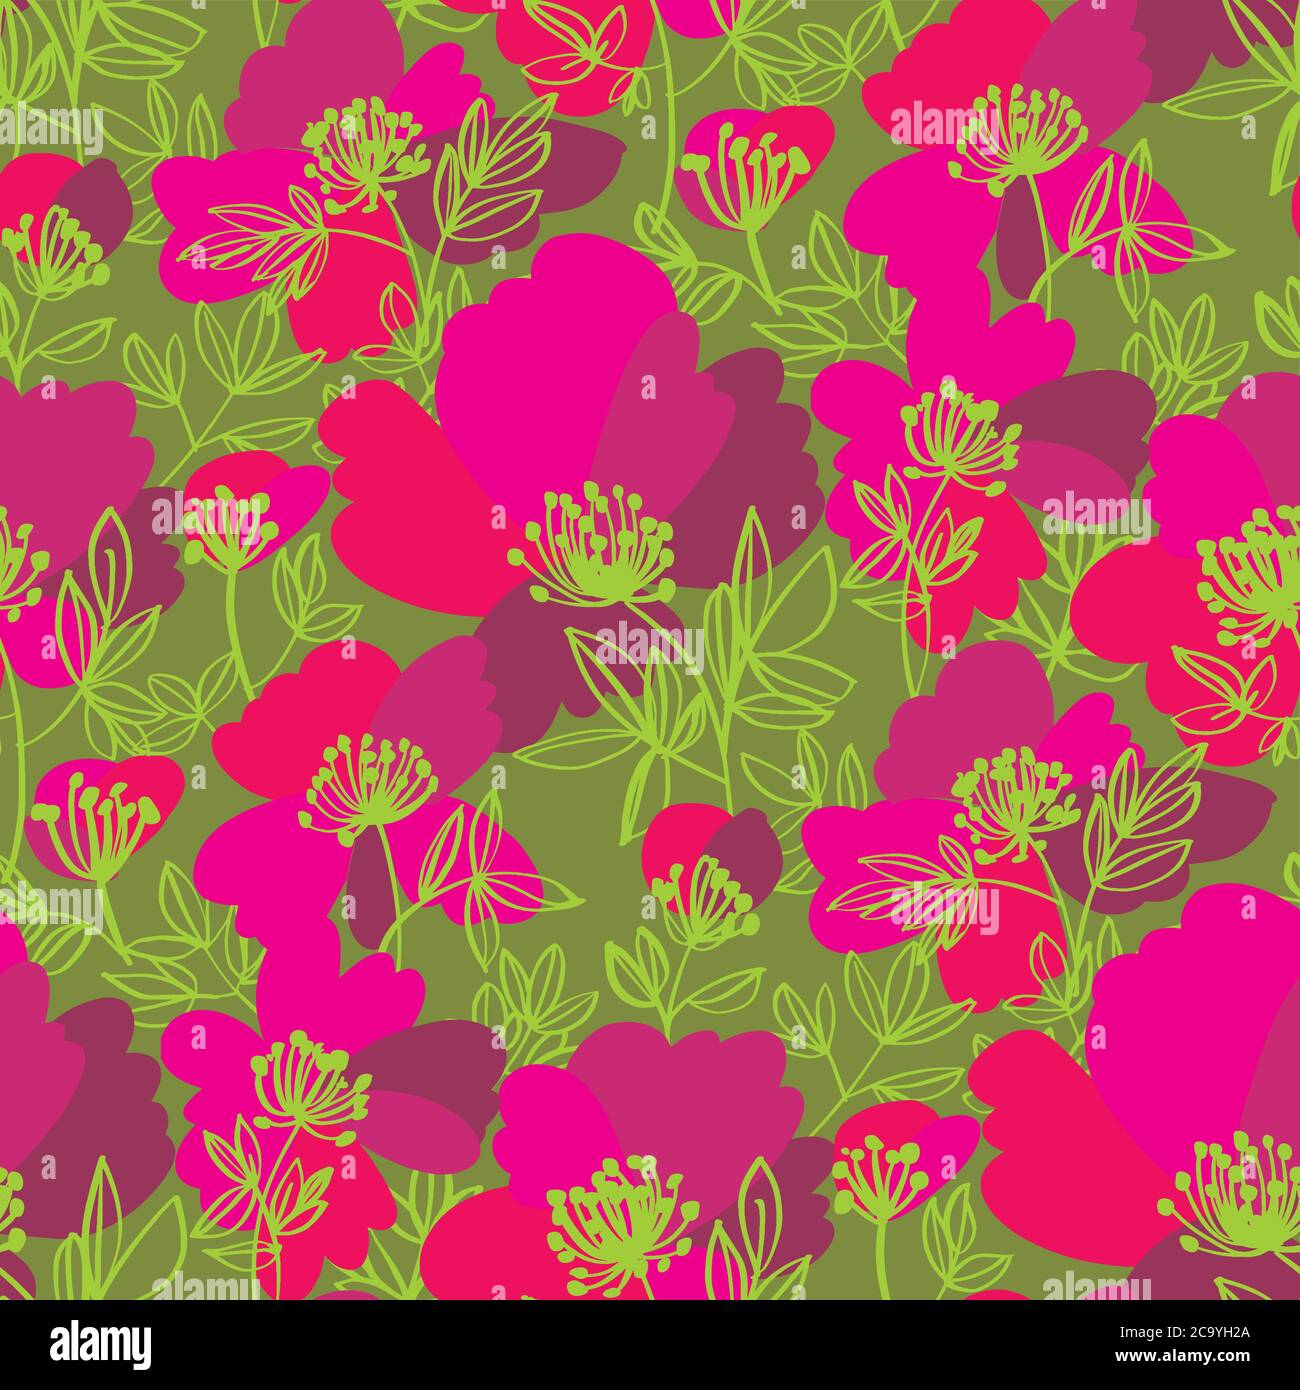 Summer wild meadow flowers seamless pattern for background, fabric, textile, wrap, surface, web and print design. Decorative abstract floral silhouett Stock Vector